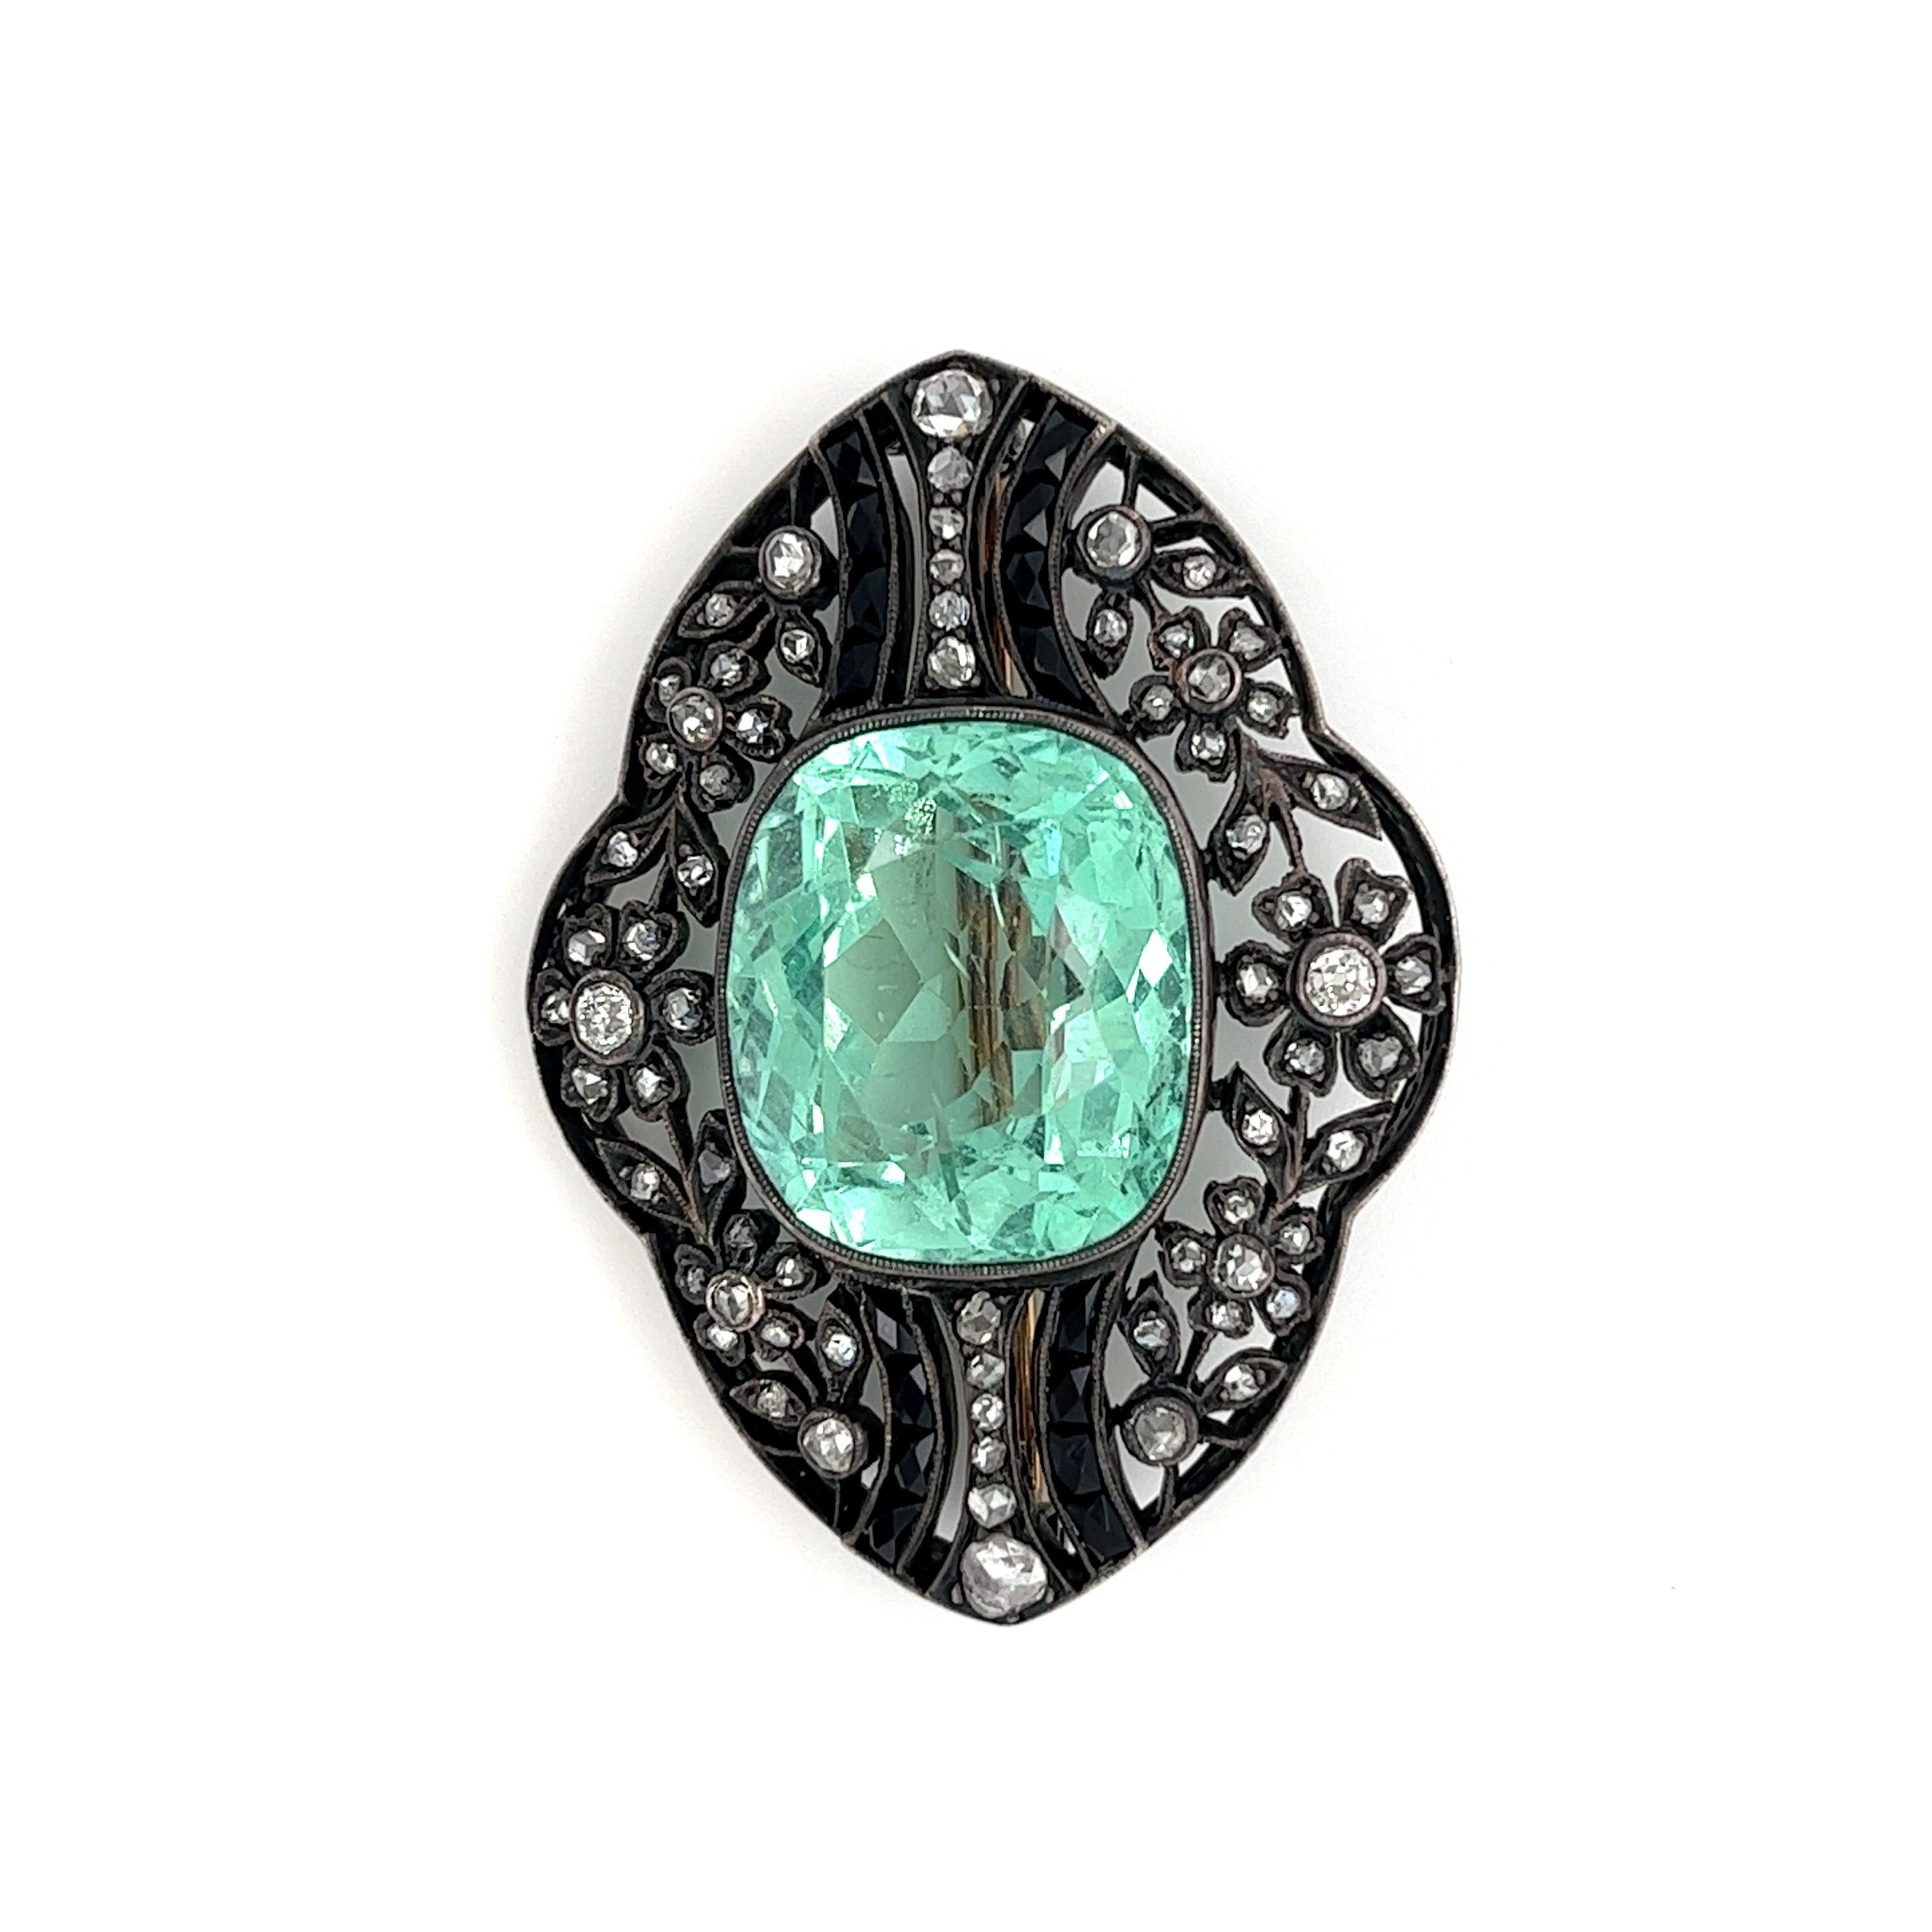 This magnificent Russian Antique Beryl and Old Mine Onyx Brooch Pin is a remarkable example of the antique Russian jewels of the 19th and early-20th centuries. The Beryl is a very rare gem from the Ural Mountains in Russia. AGL certified with origin